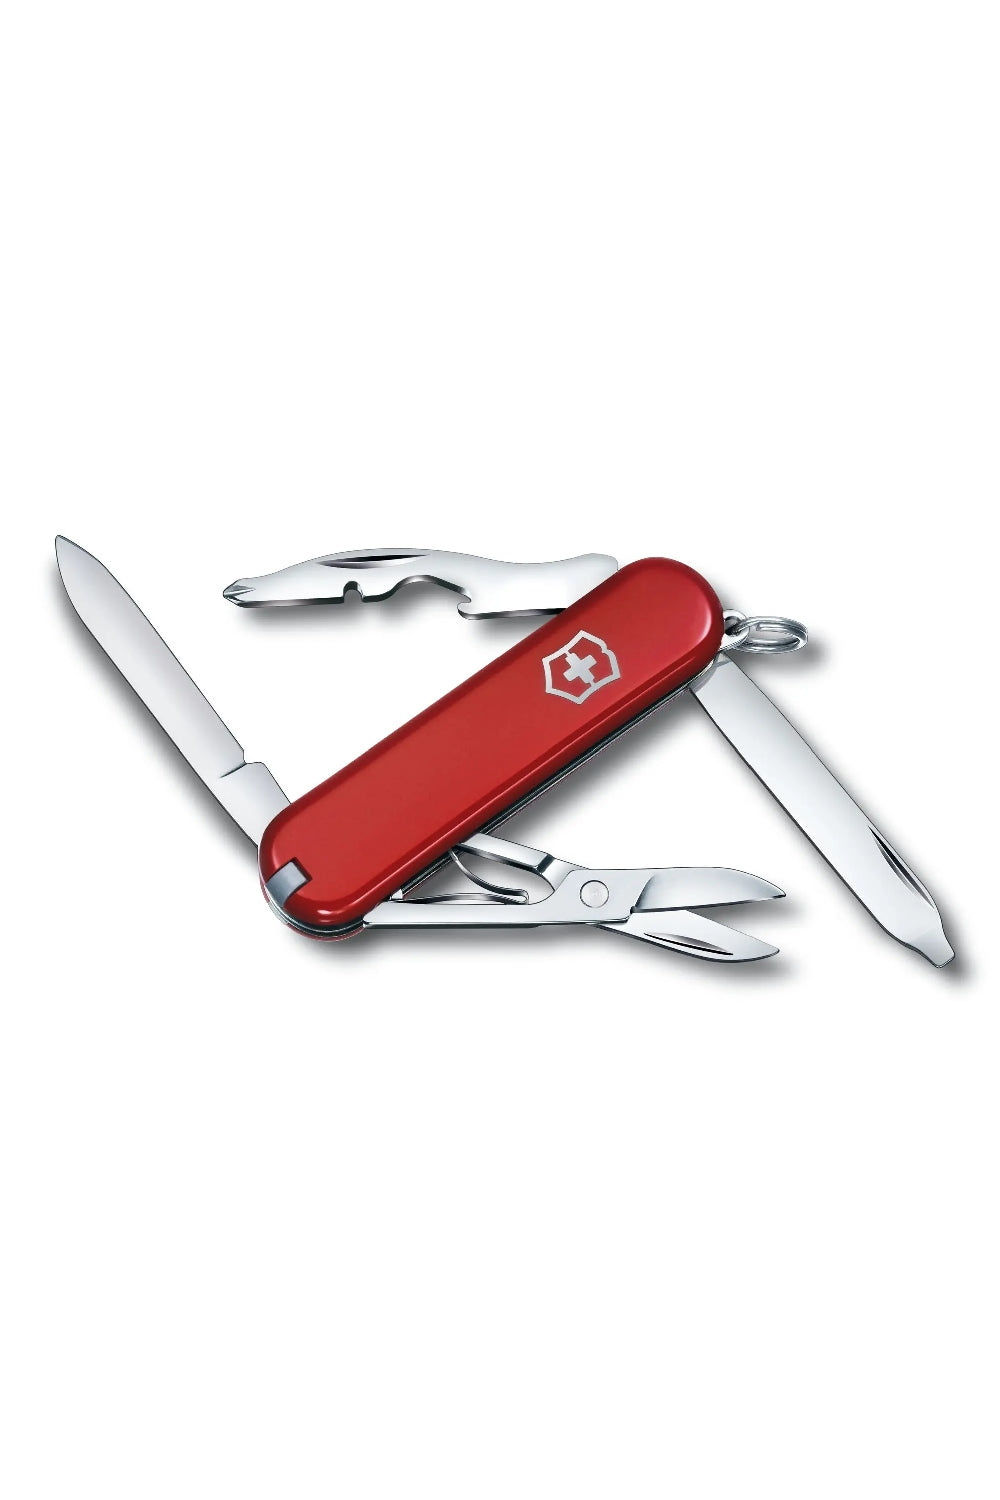 Victorinox Rambler Swiss Army Small Pocket Knife in Red